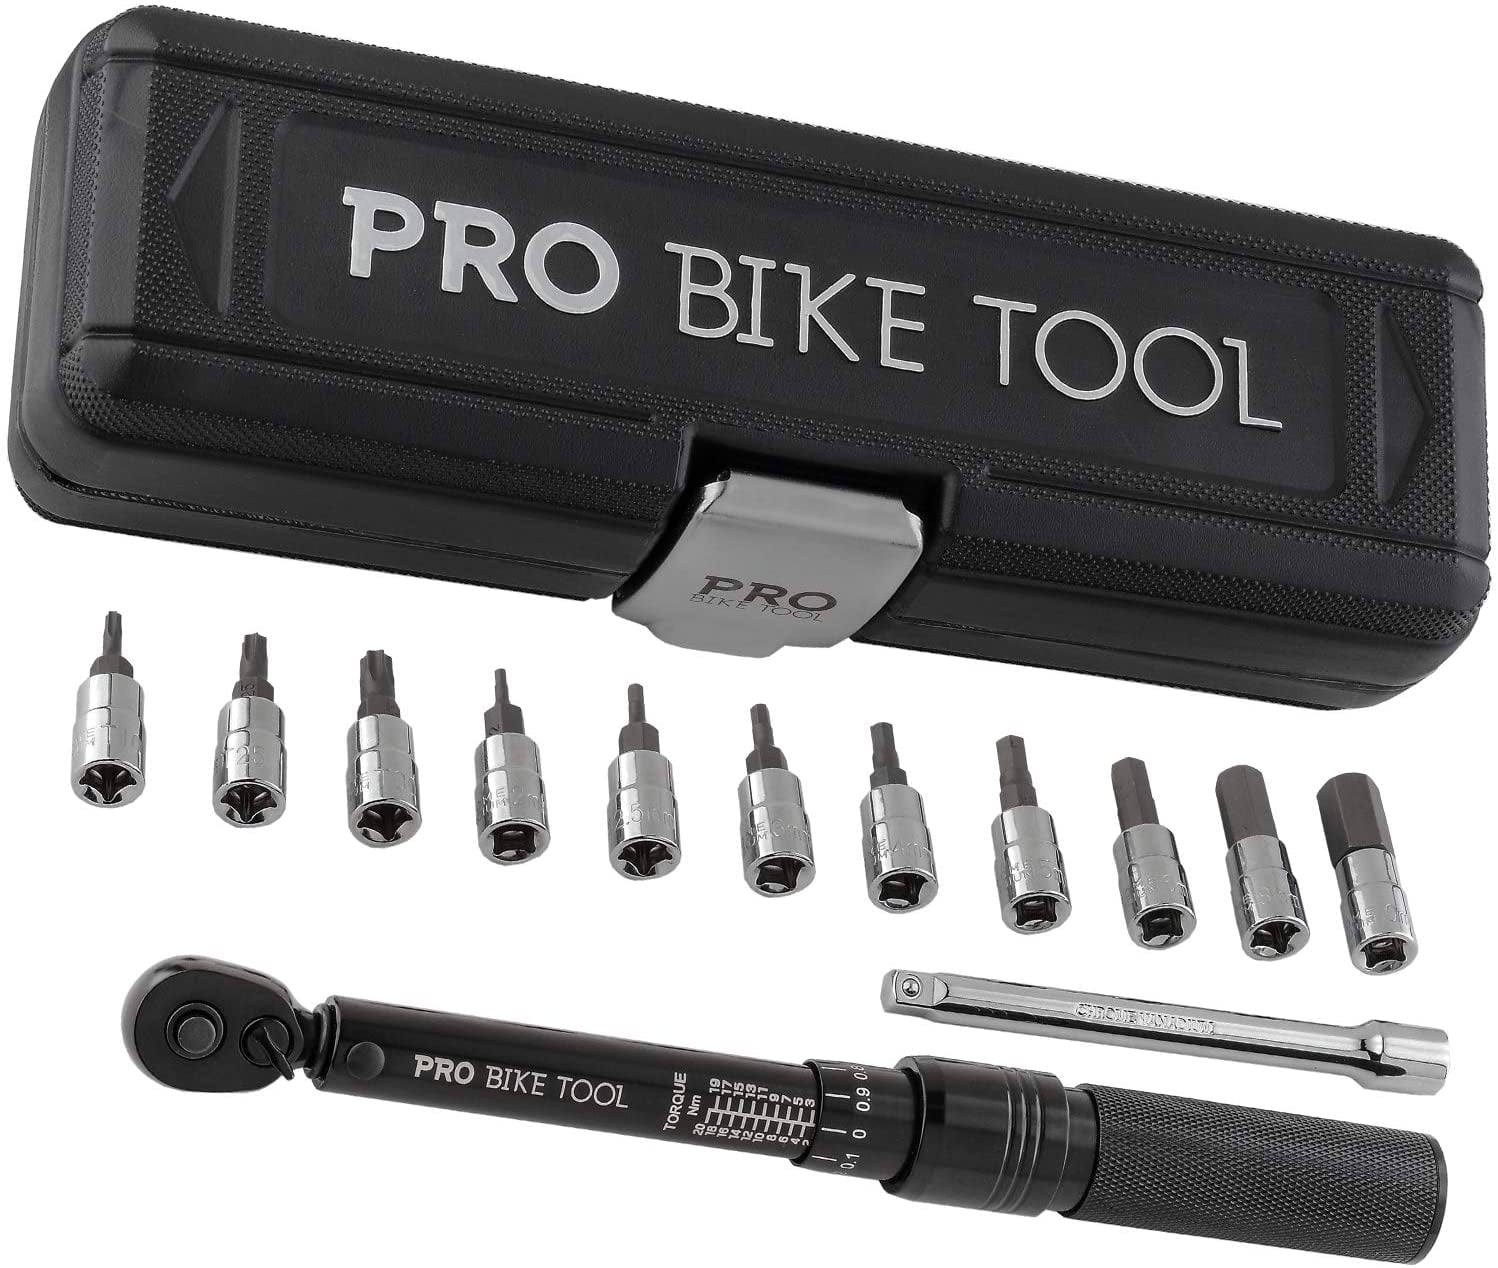 Details about   1/4" 1-25Nm Adjustable Torque Wrench Diamond-grip tool Black Bicycle/Motor/Home 